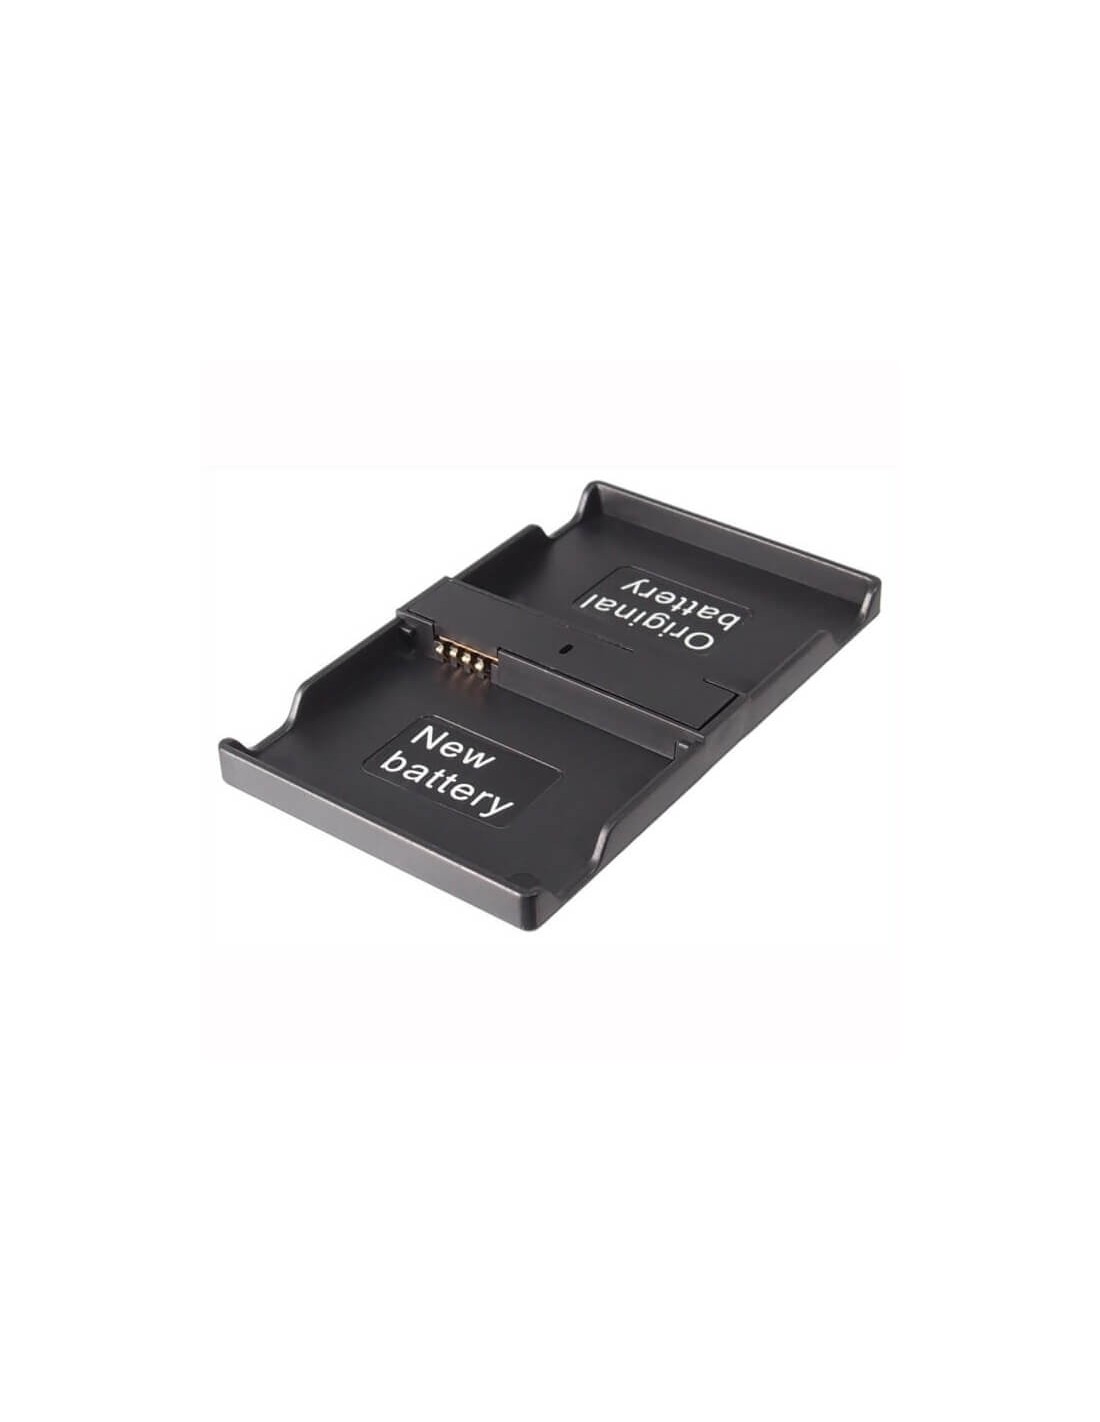 Battery for Blackberry Torch, Torch 9800 3.7V, 2200mAh - 8.14Wh